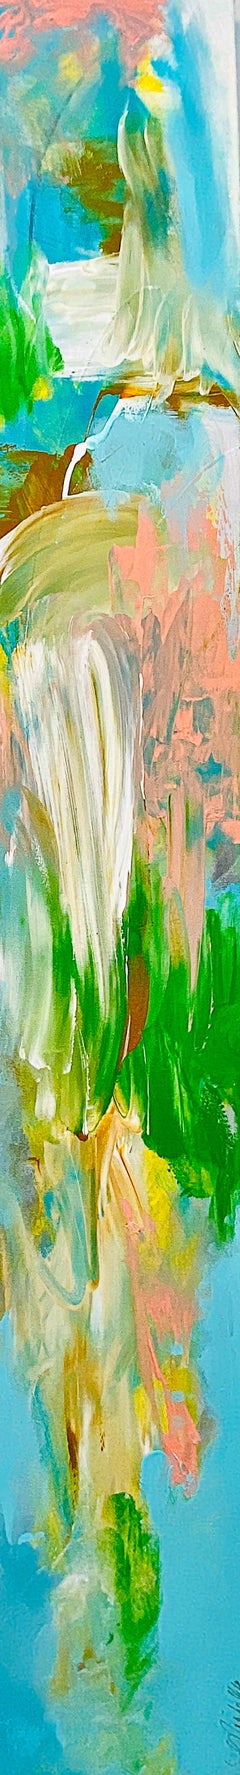 Vintage "Song of Spring", Landscape Abstract, Emotional, Pastel, Blue, Peach, Green